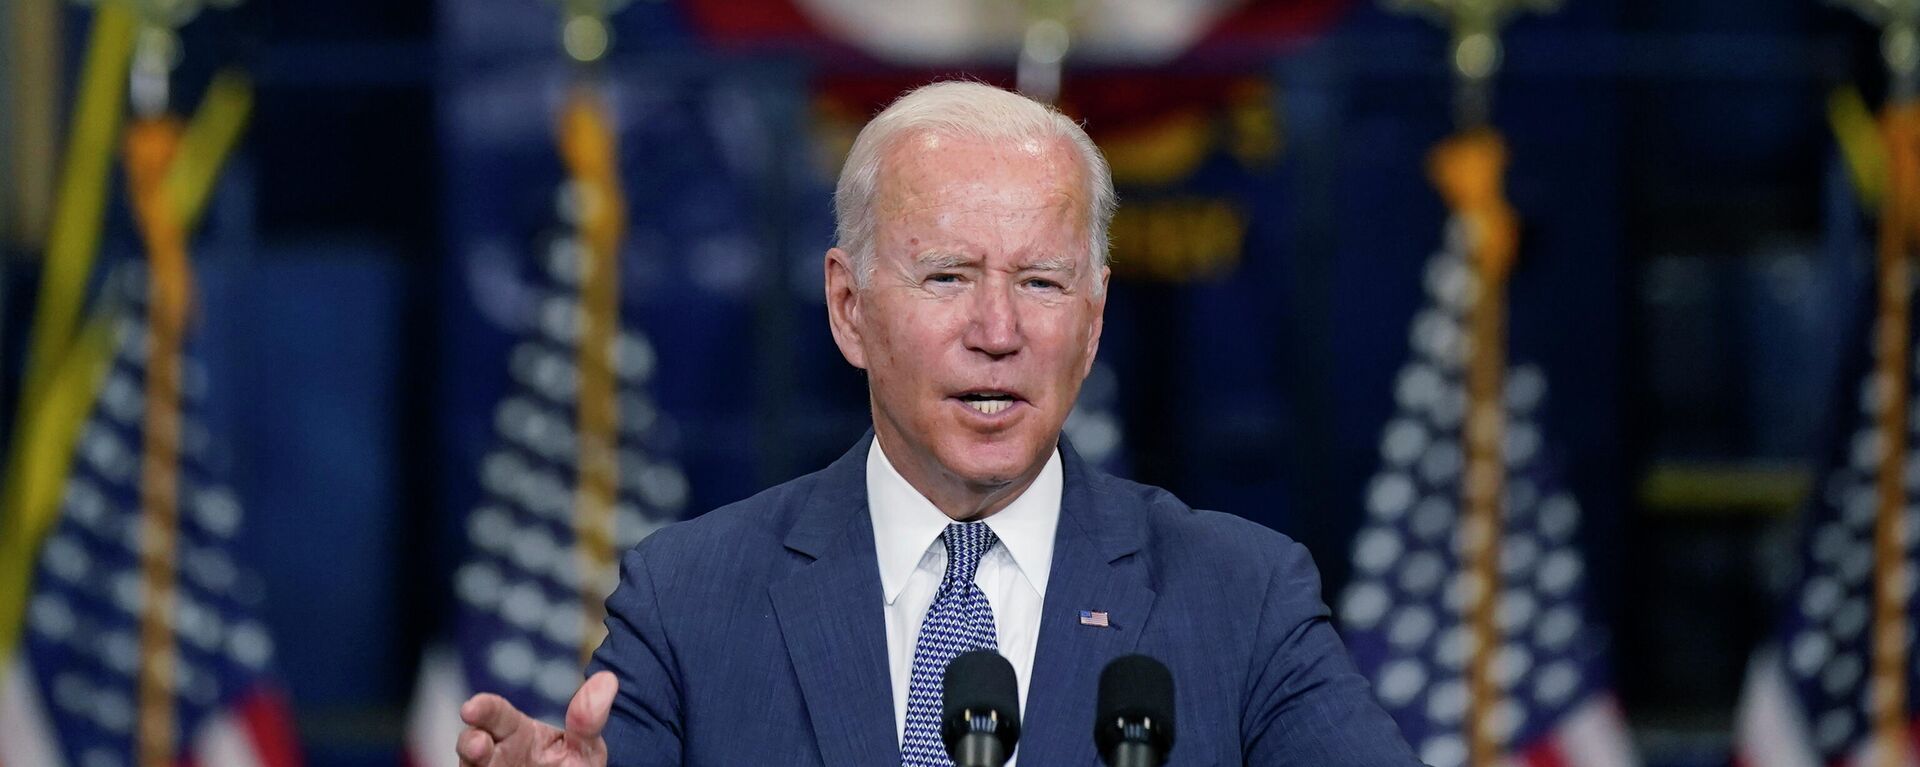 In this Oct. 25, 2021, photo, President Joe Biden speaks at NJ Transit Meadowlands Maintenance Complex to promote his economic agenda in Kearny, N.J. Biden promised to show the world that democracies can work to meet the challenges of the 21st century - Sputnik International, 1920, 24.11.2021